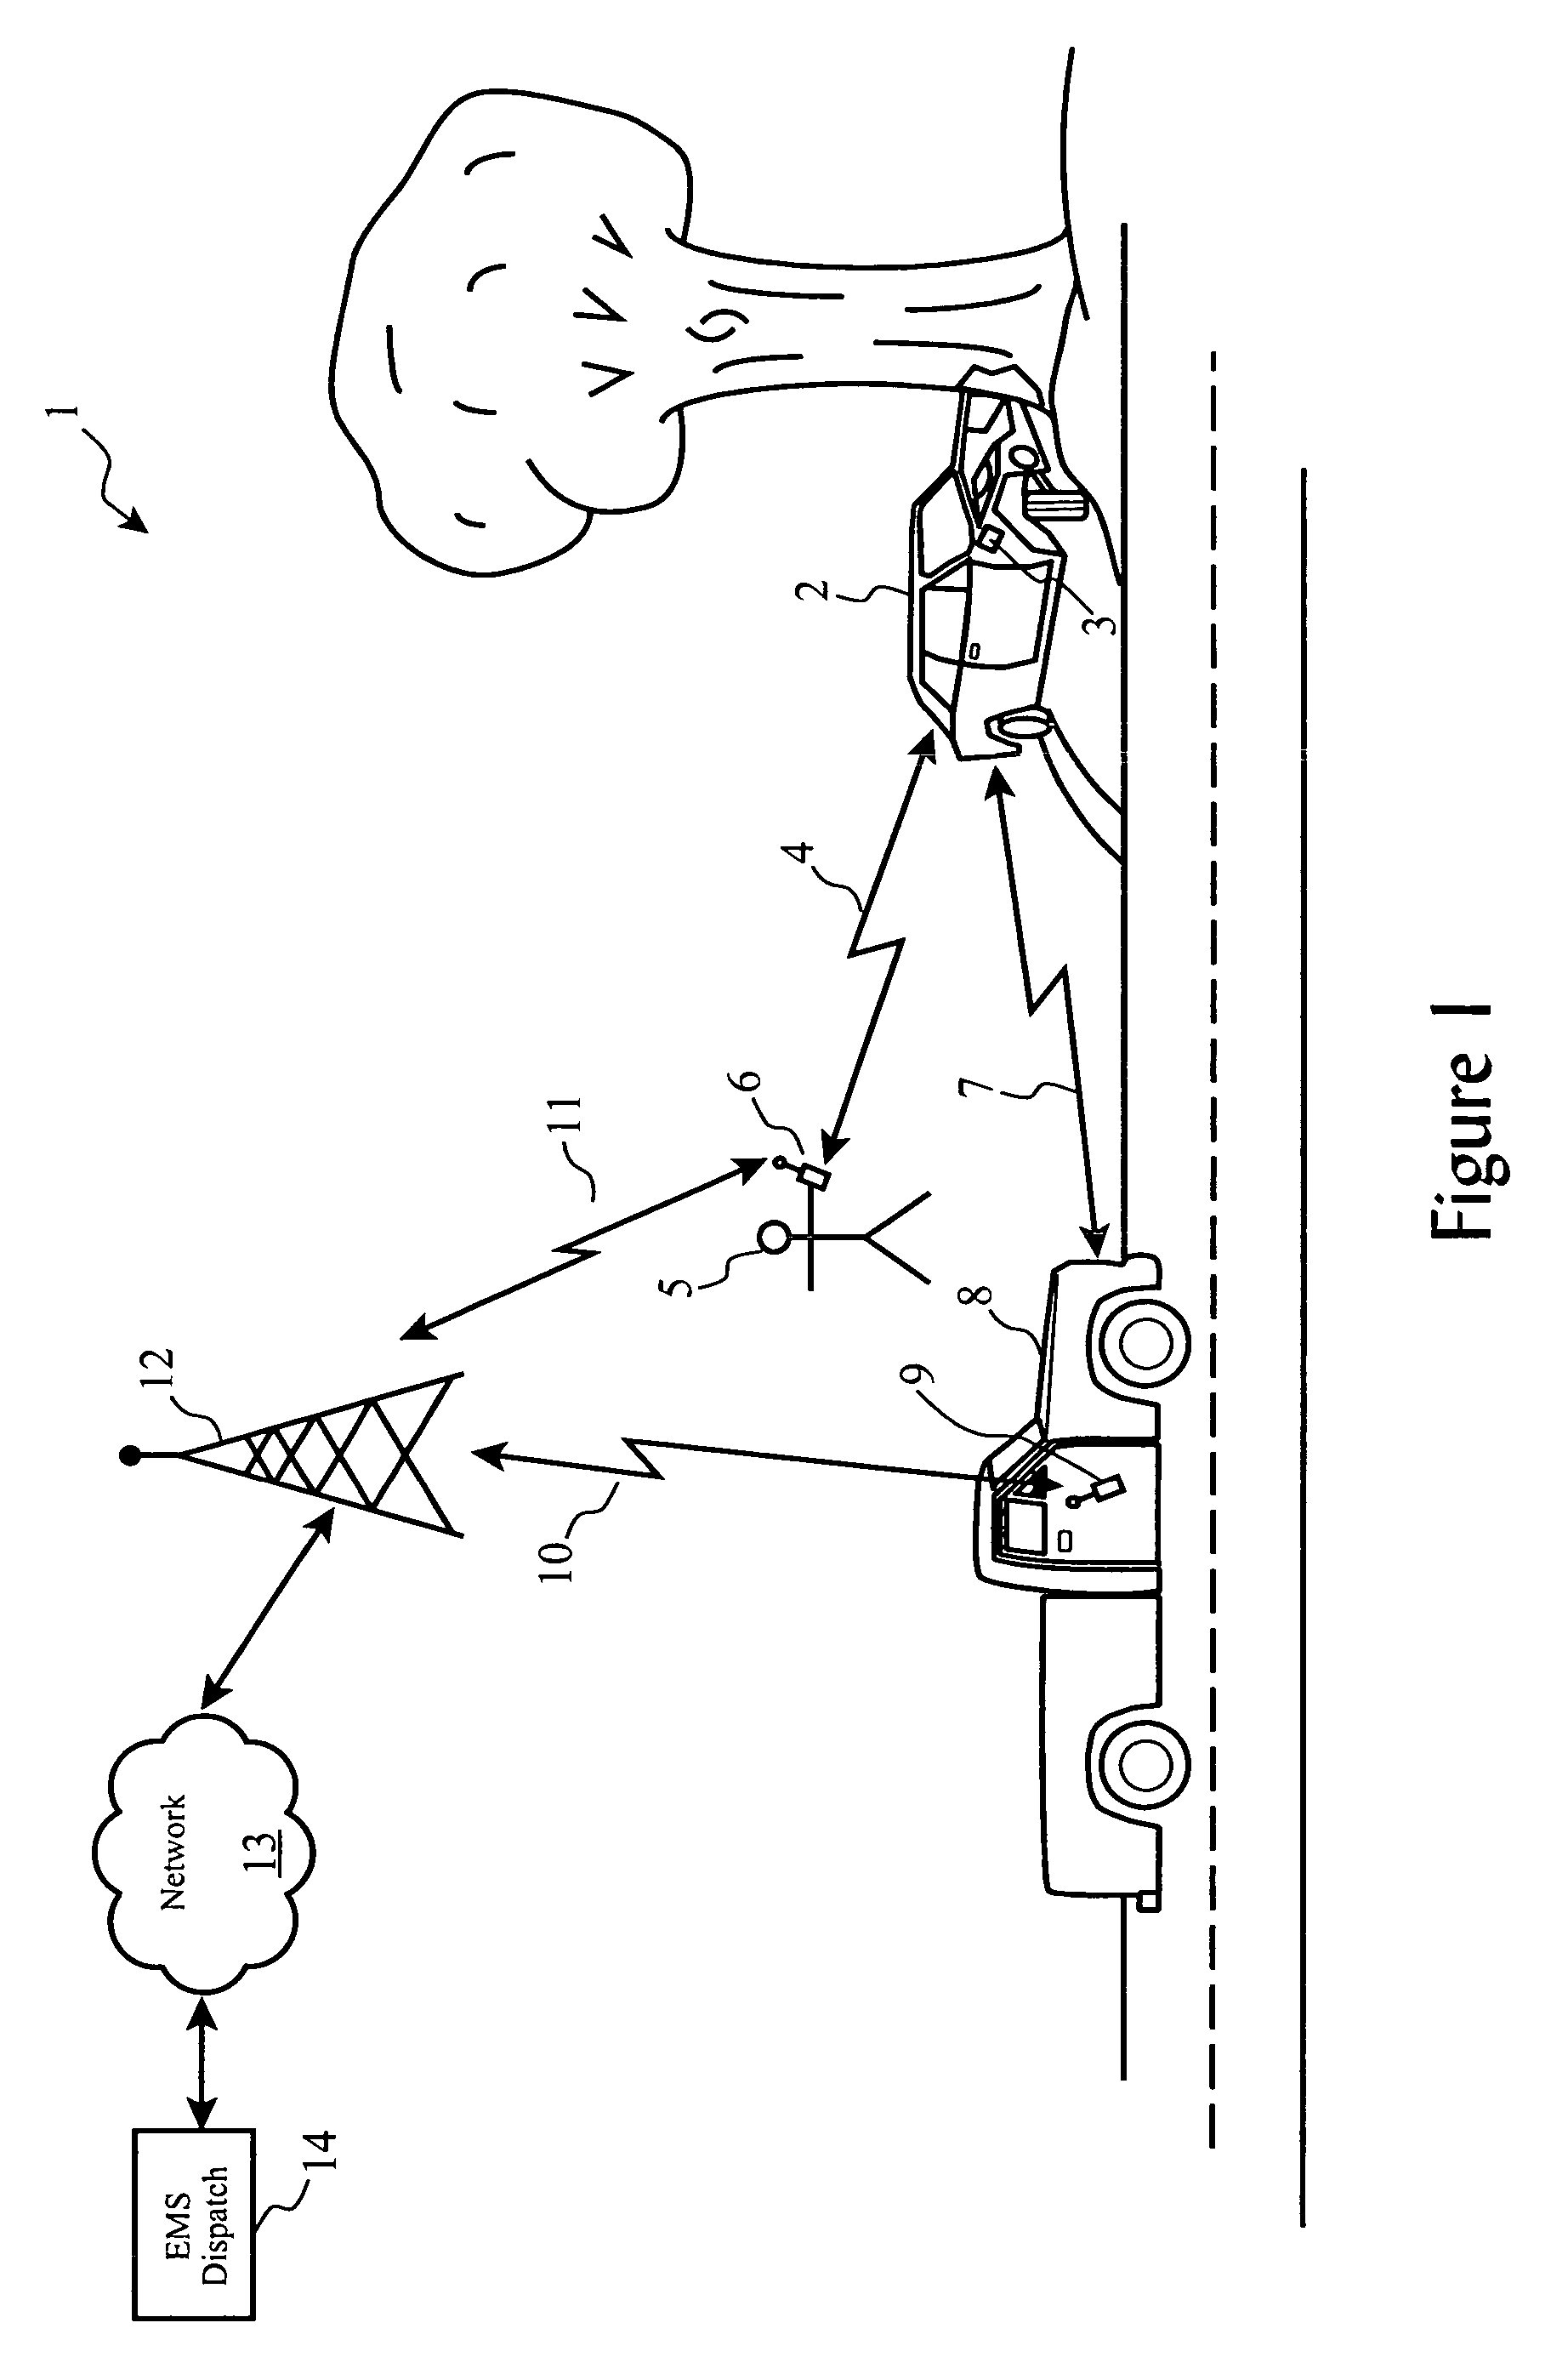 System for automatic wireless utilization of cellular telephone devices in an emergency by co-opting nearby cellular telephone devices